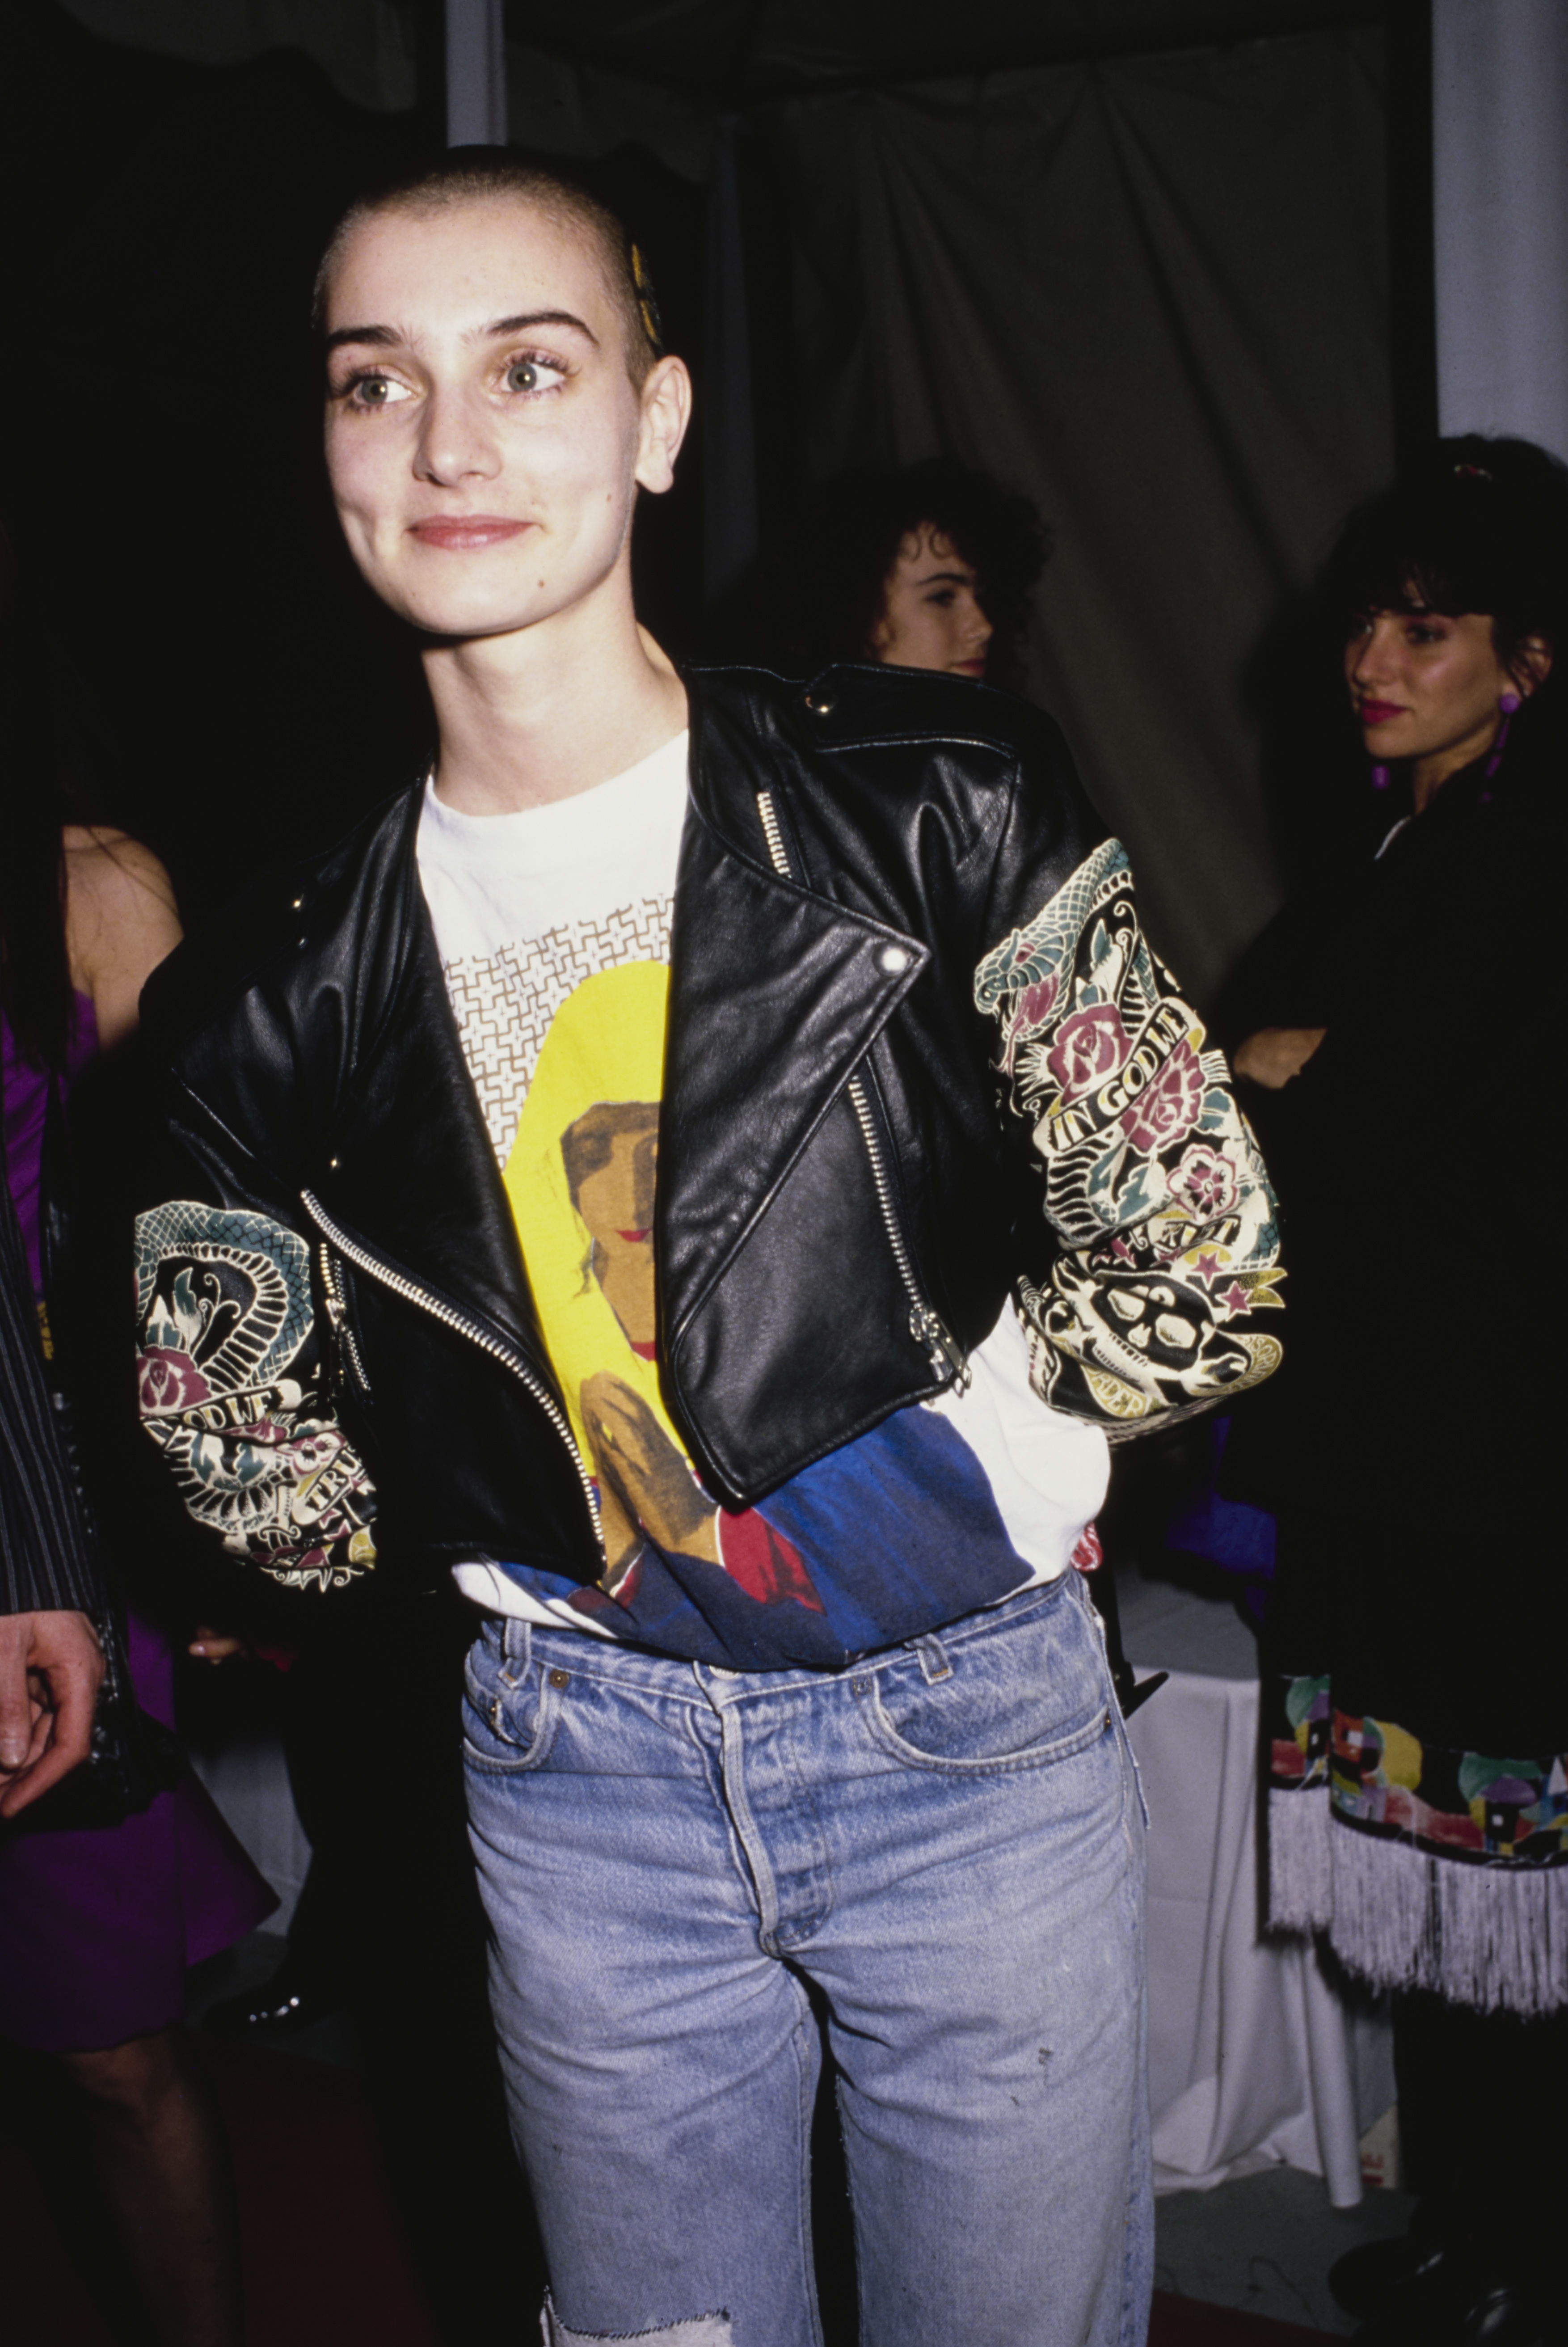 Irish singer-songwriter Sinead O'Connor, wearing a black leather jacket over a t-shirt with an image of a praying Virgin Mary, attends the 31st Annual Grammy Awards, held at the Shrine Auditorium in Los Angeles, California, 22nd February 1989. 